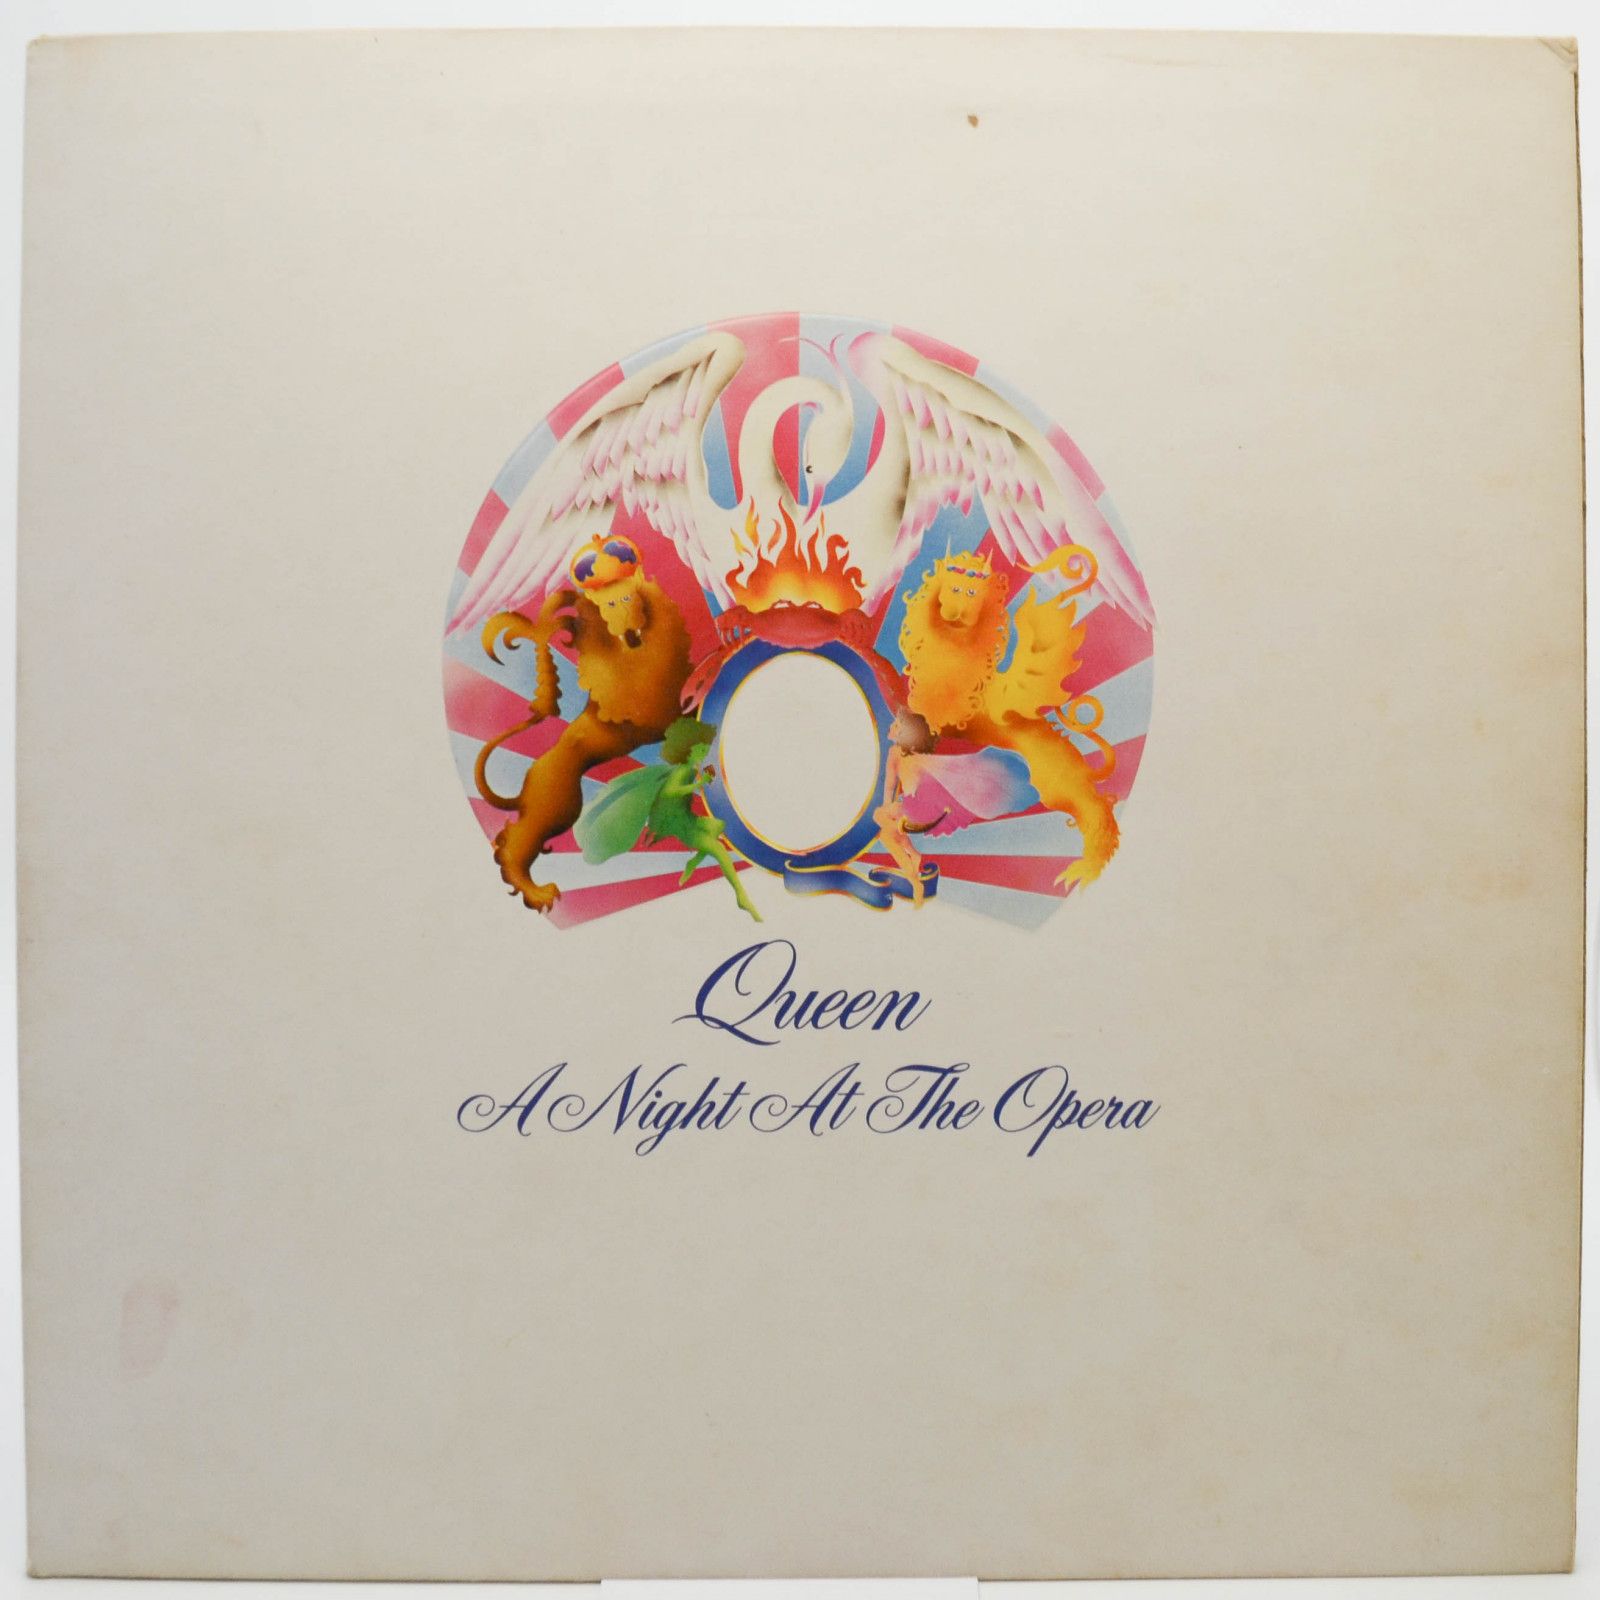 Queen — A Night At The Opera (1-st, UK), 1975